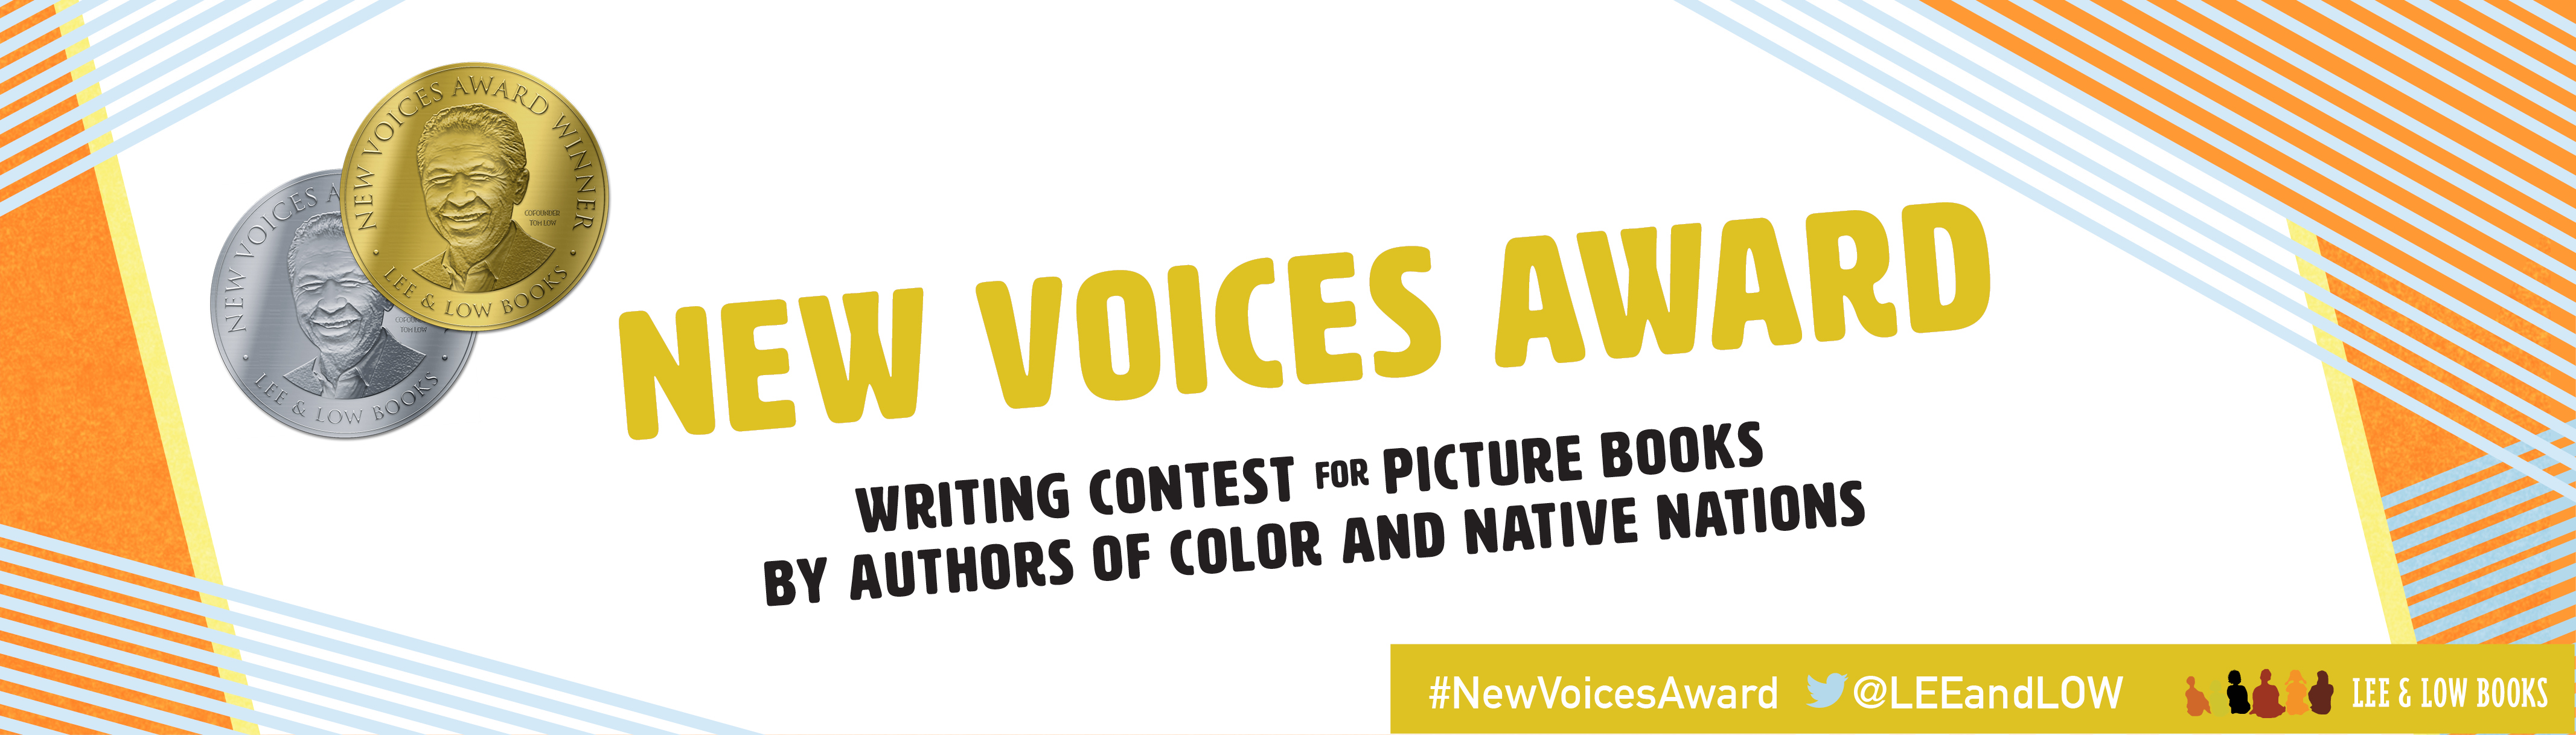 New Voices Writing Contest for Picture Books Lee & Low Books